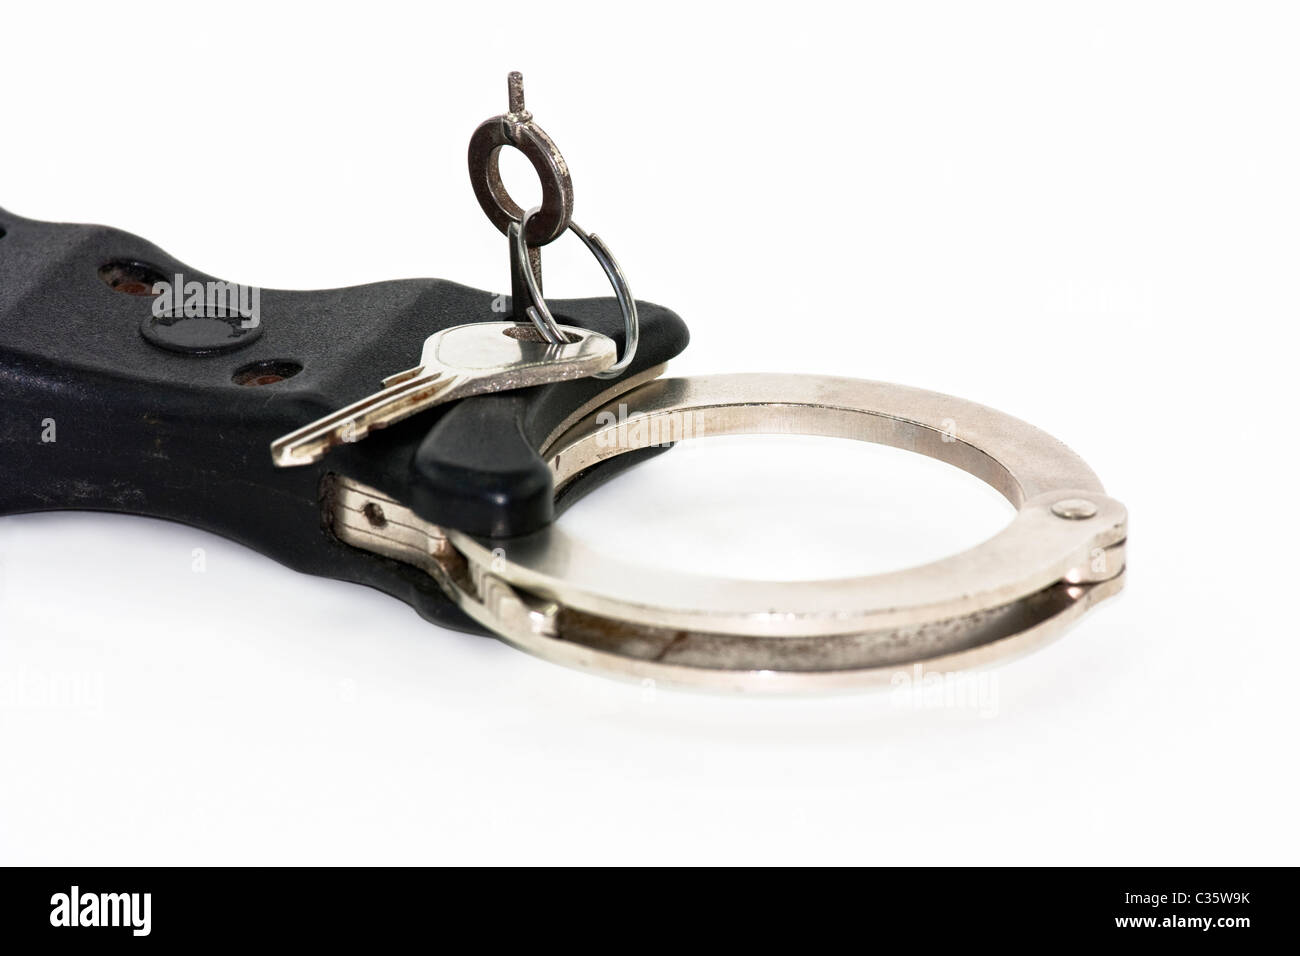 Close up of key in handcuffs isolated on white Banque D'Images